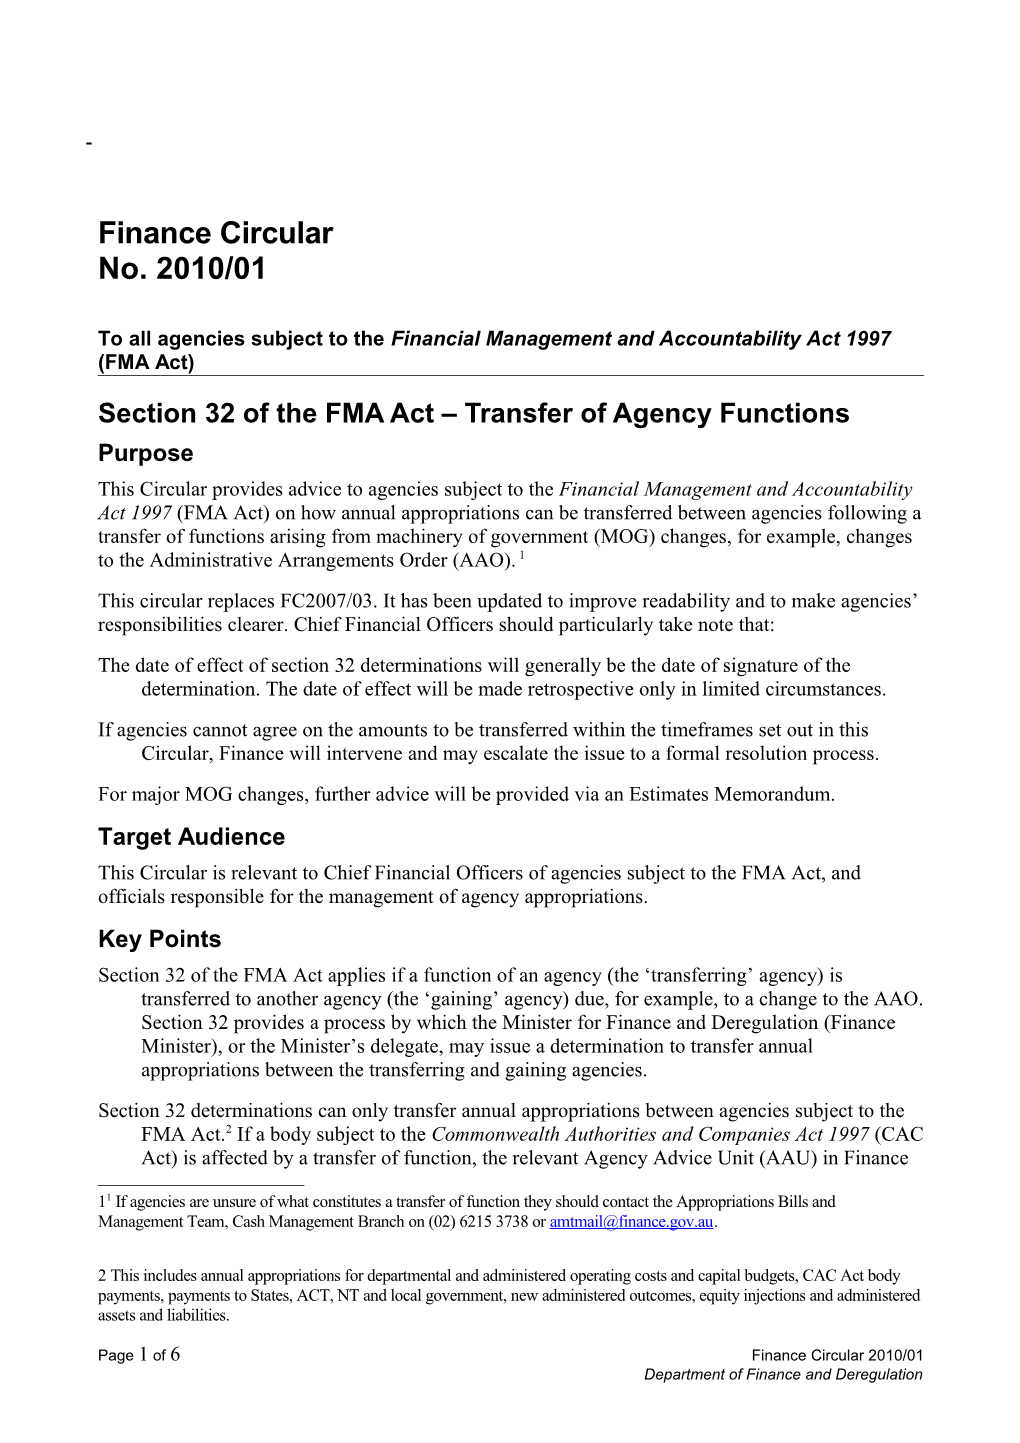 To All Agencies Subject to the Financial Management and Accountability Act 1997 (FMA Act)